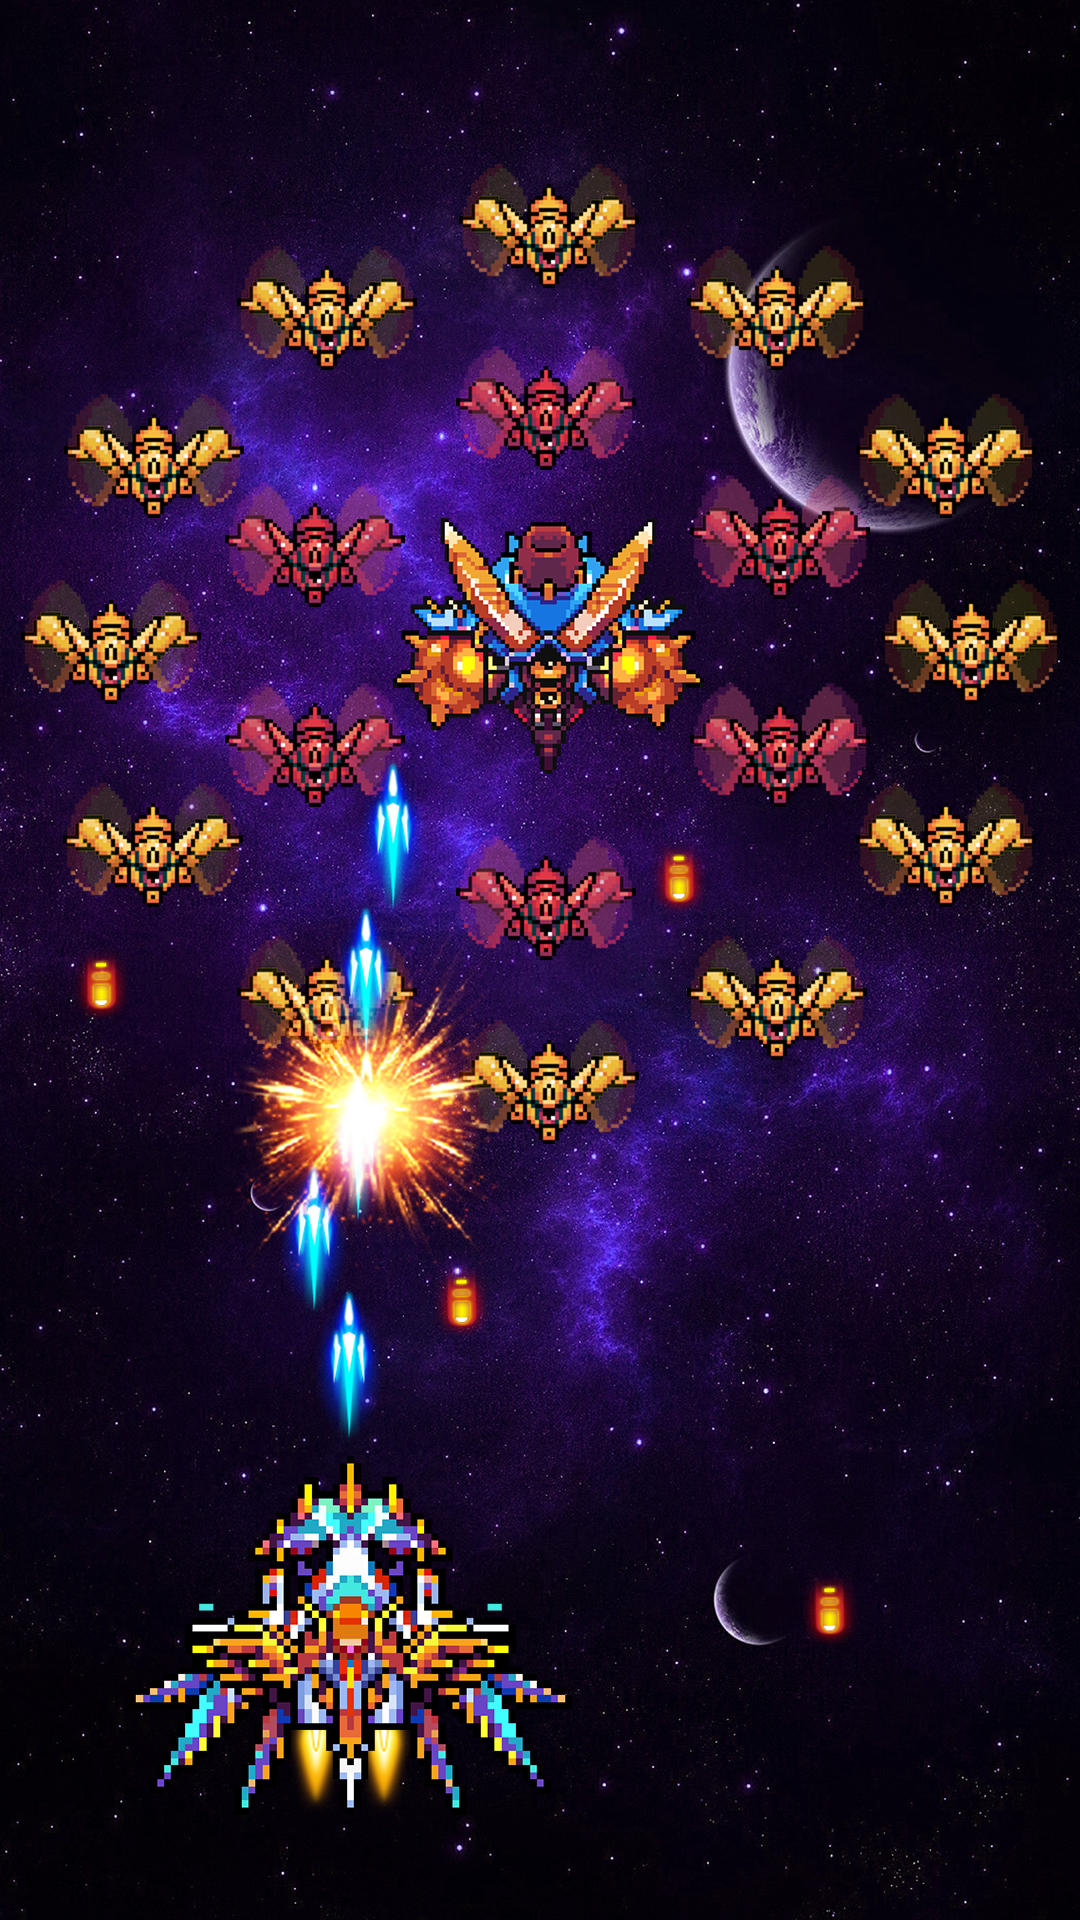 Screenshot 1 of Falcon Squad - Space shooter 98.0